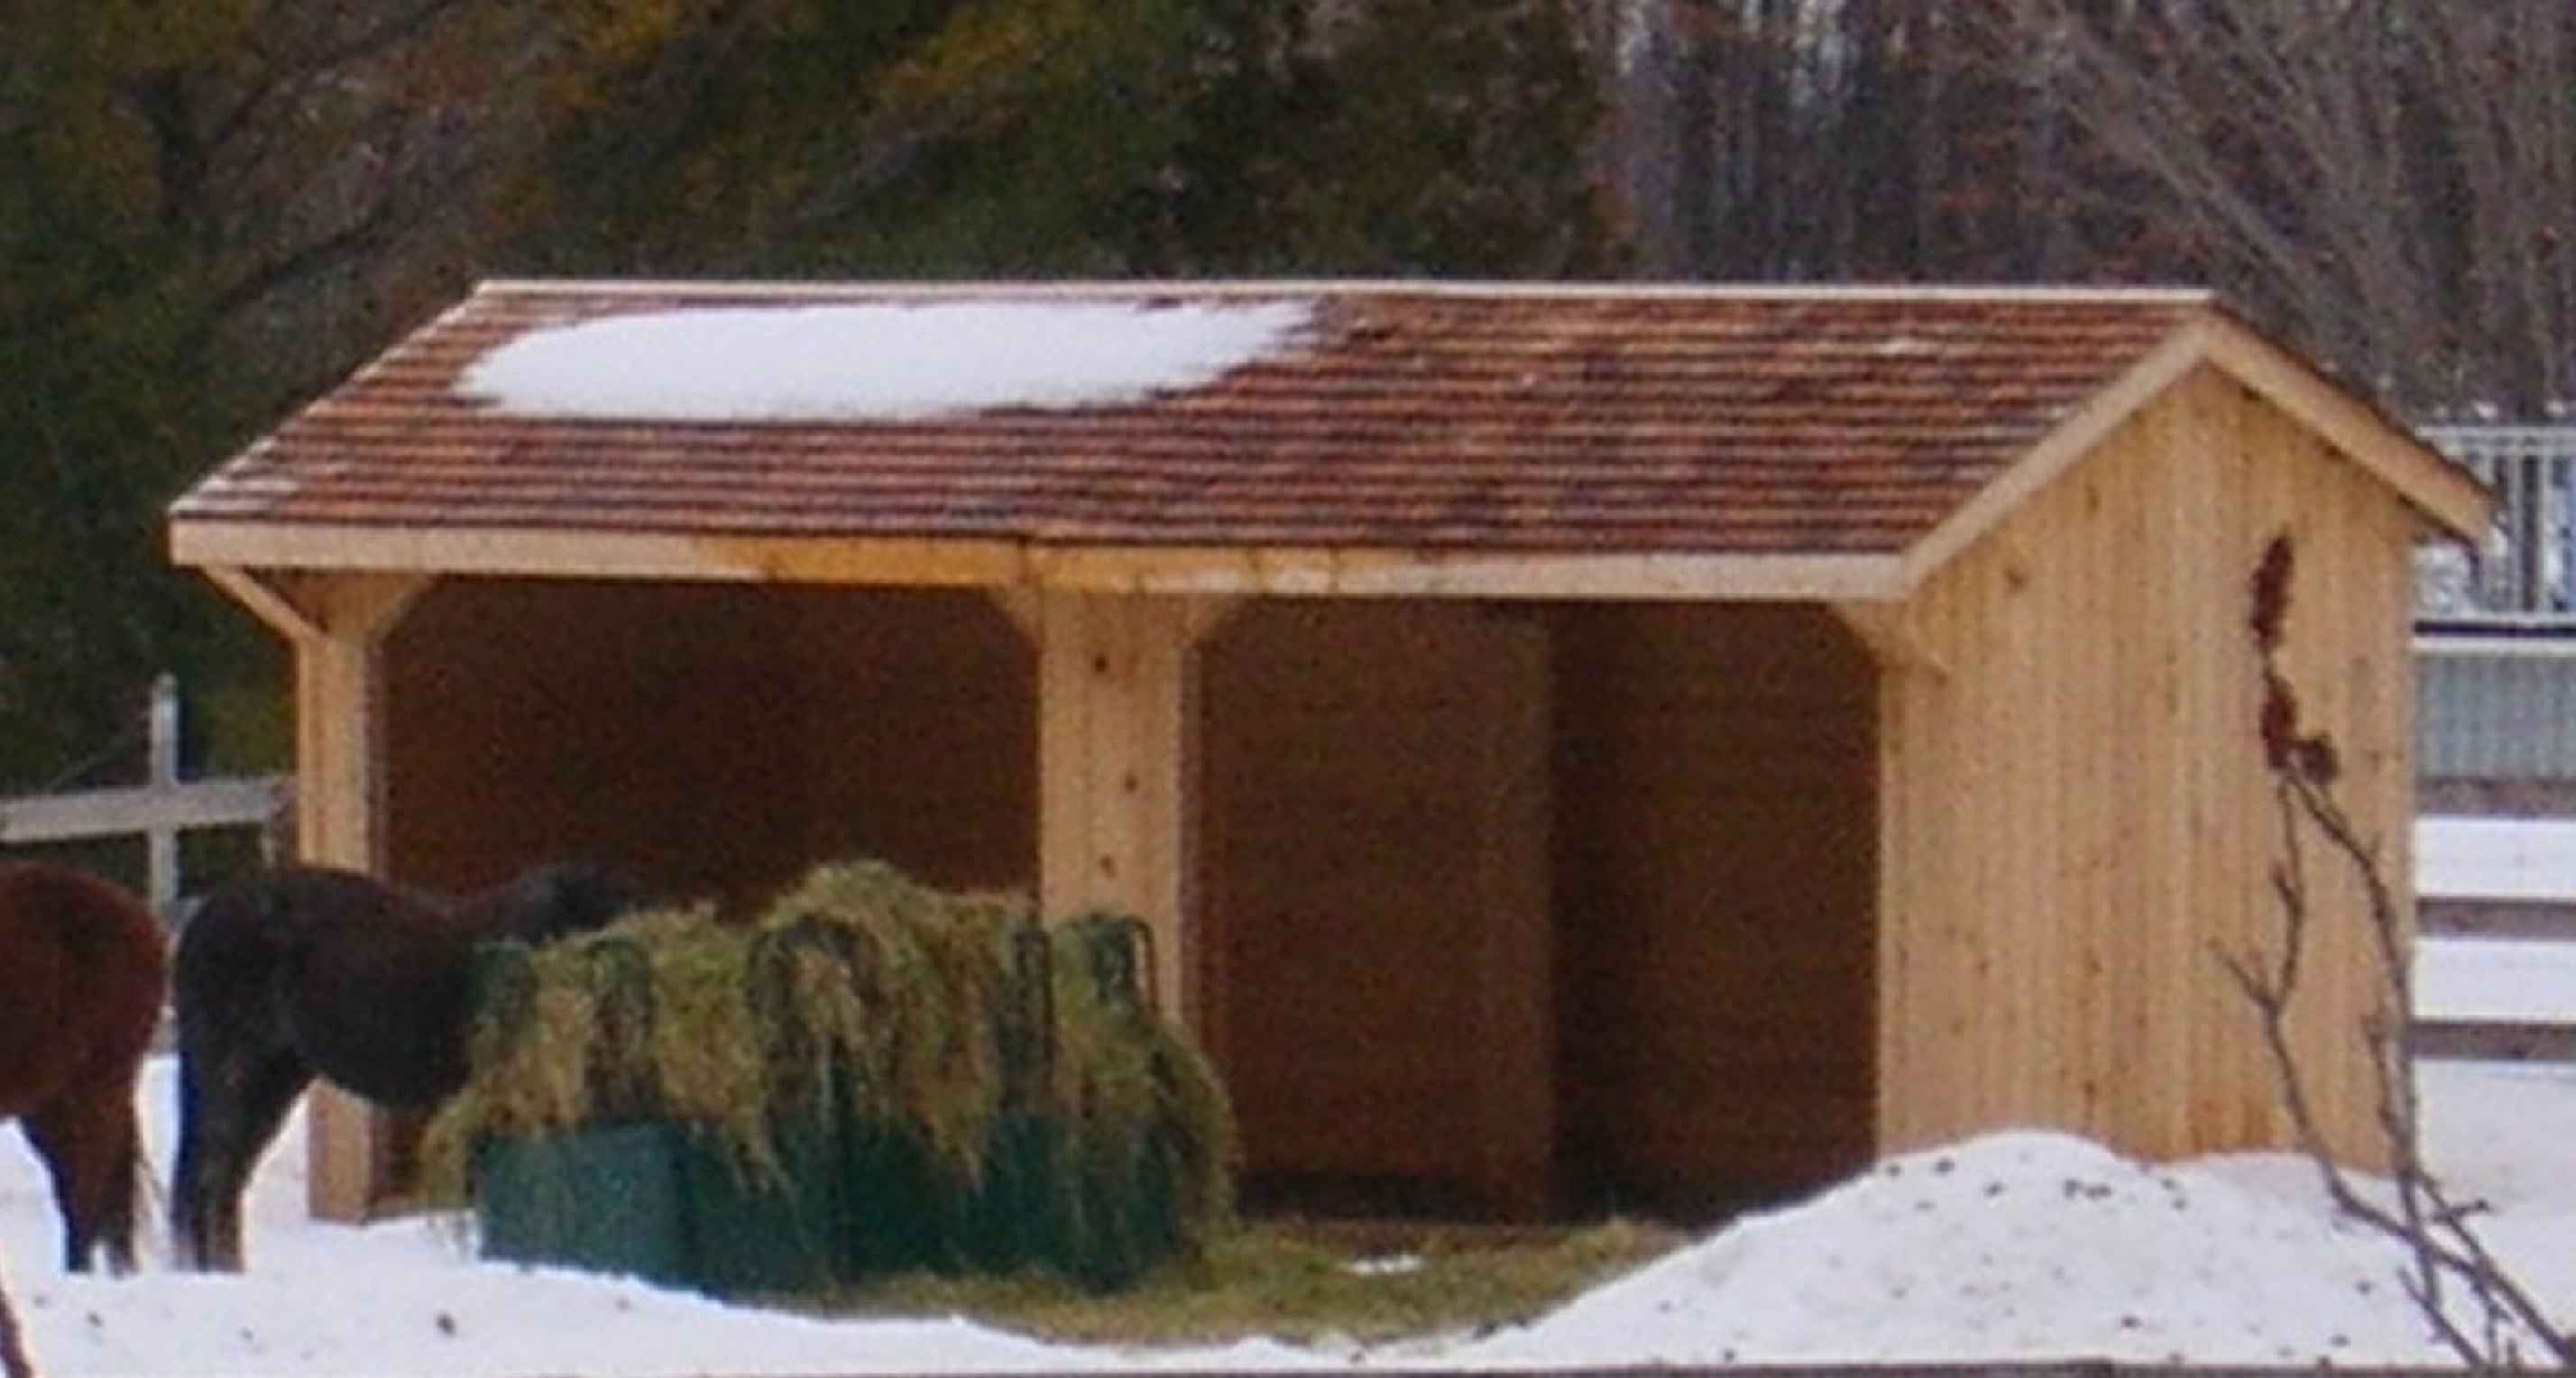 shed plans greenhouse - how to learn diy building shed